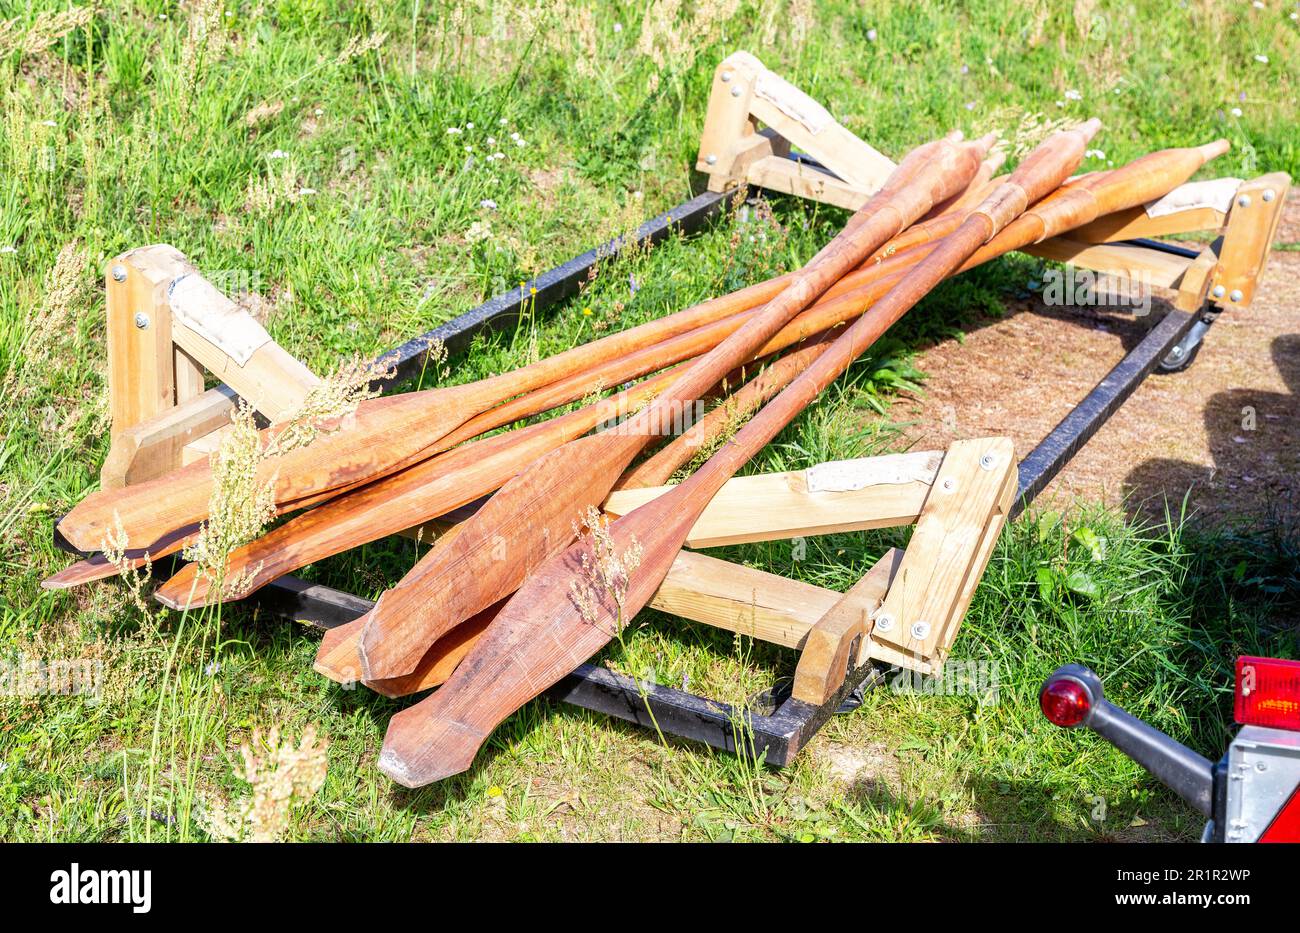 Many wooden oars of a large rowing boat Stock Photo